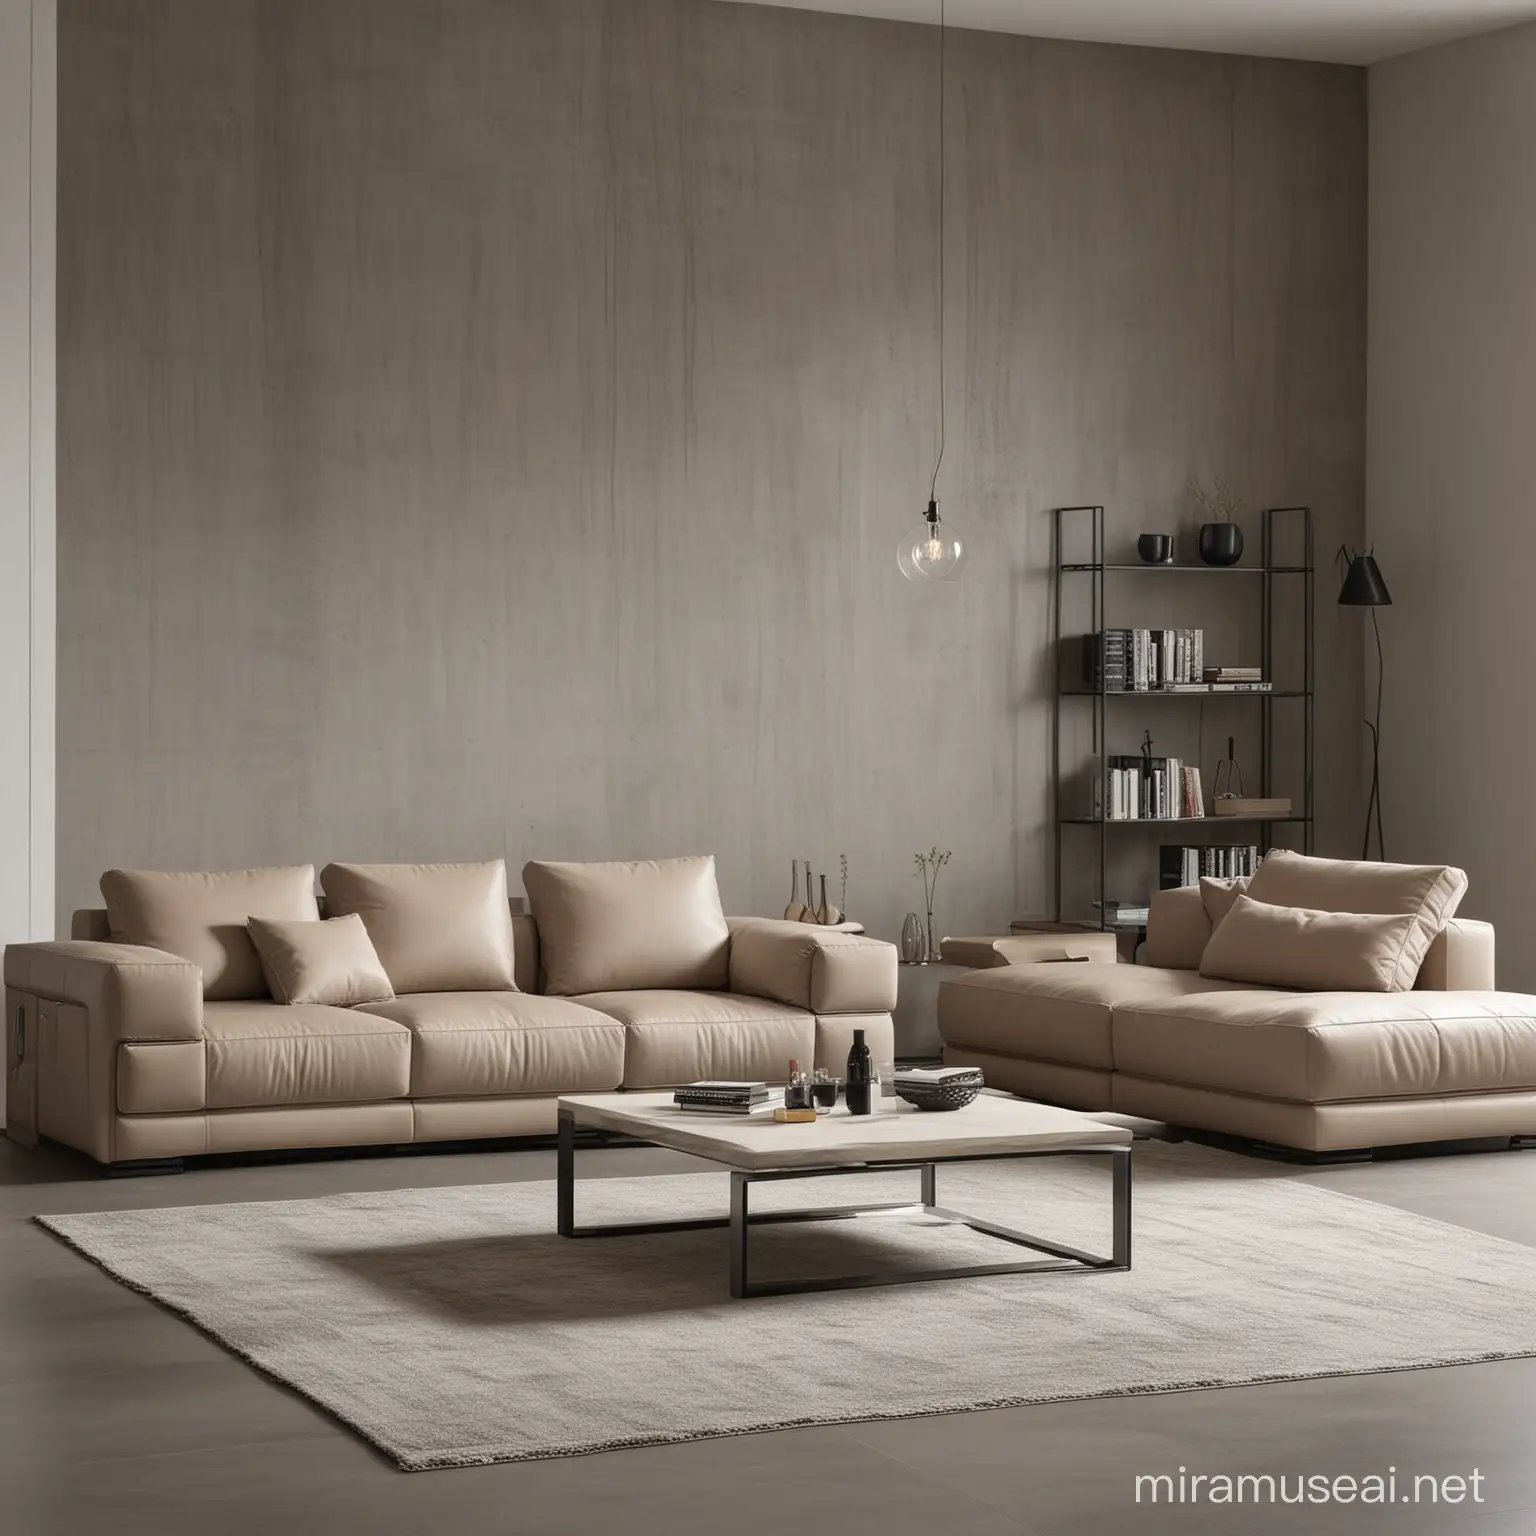 Luxurious Living Room Furniture Collection Showcase